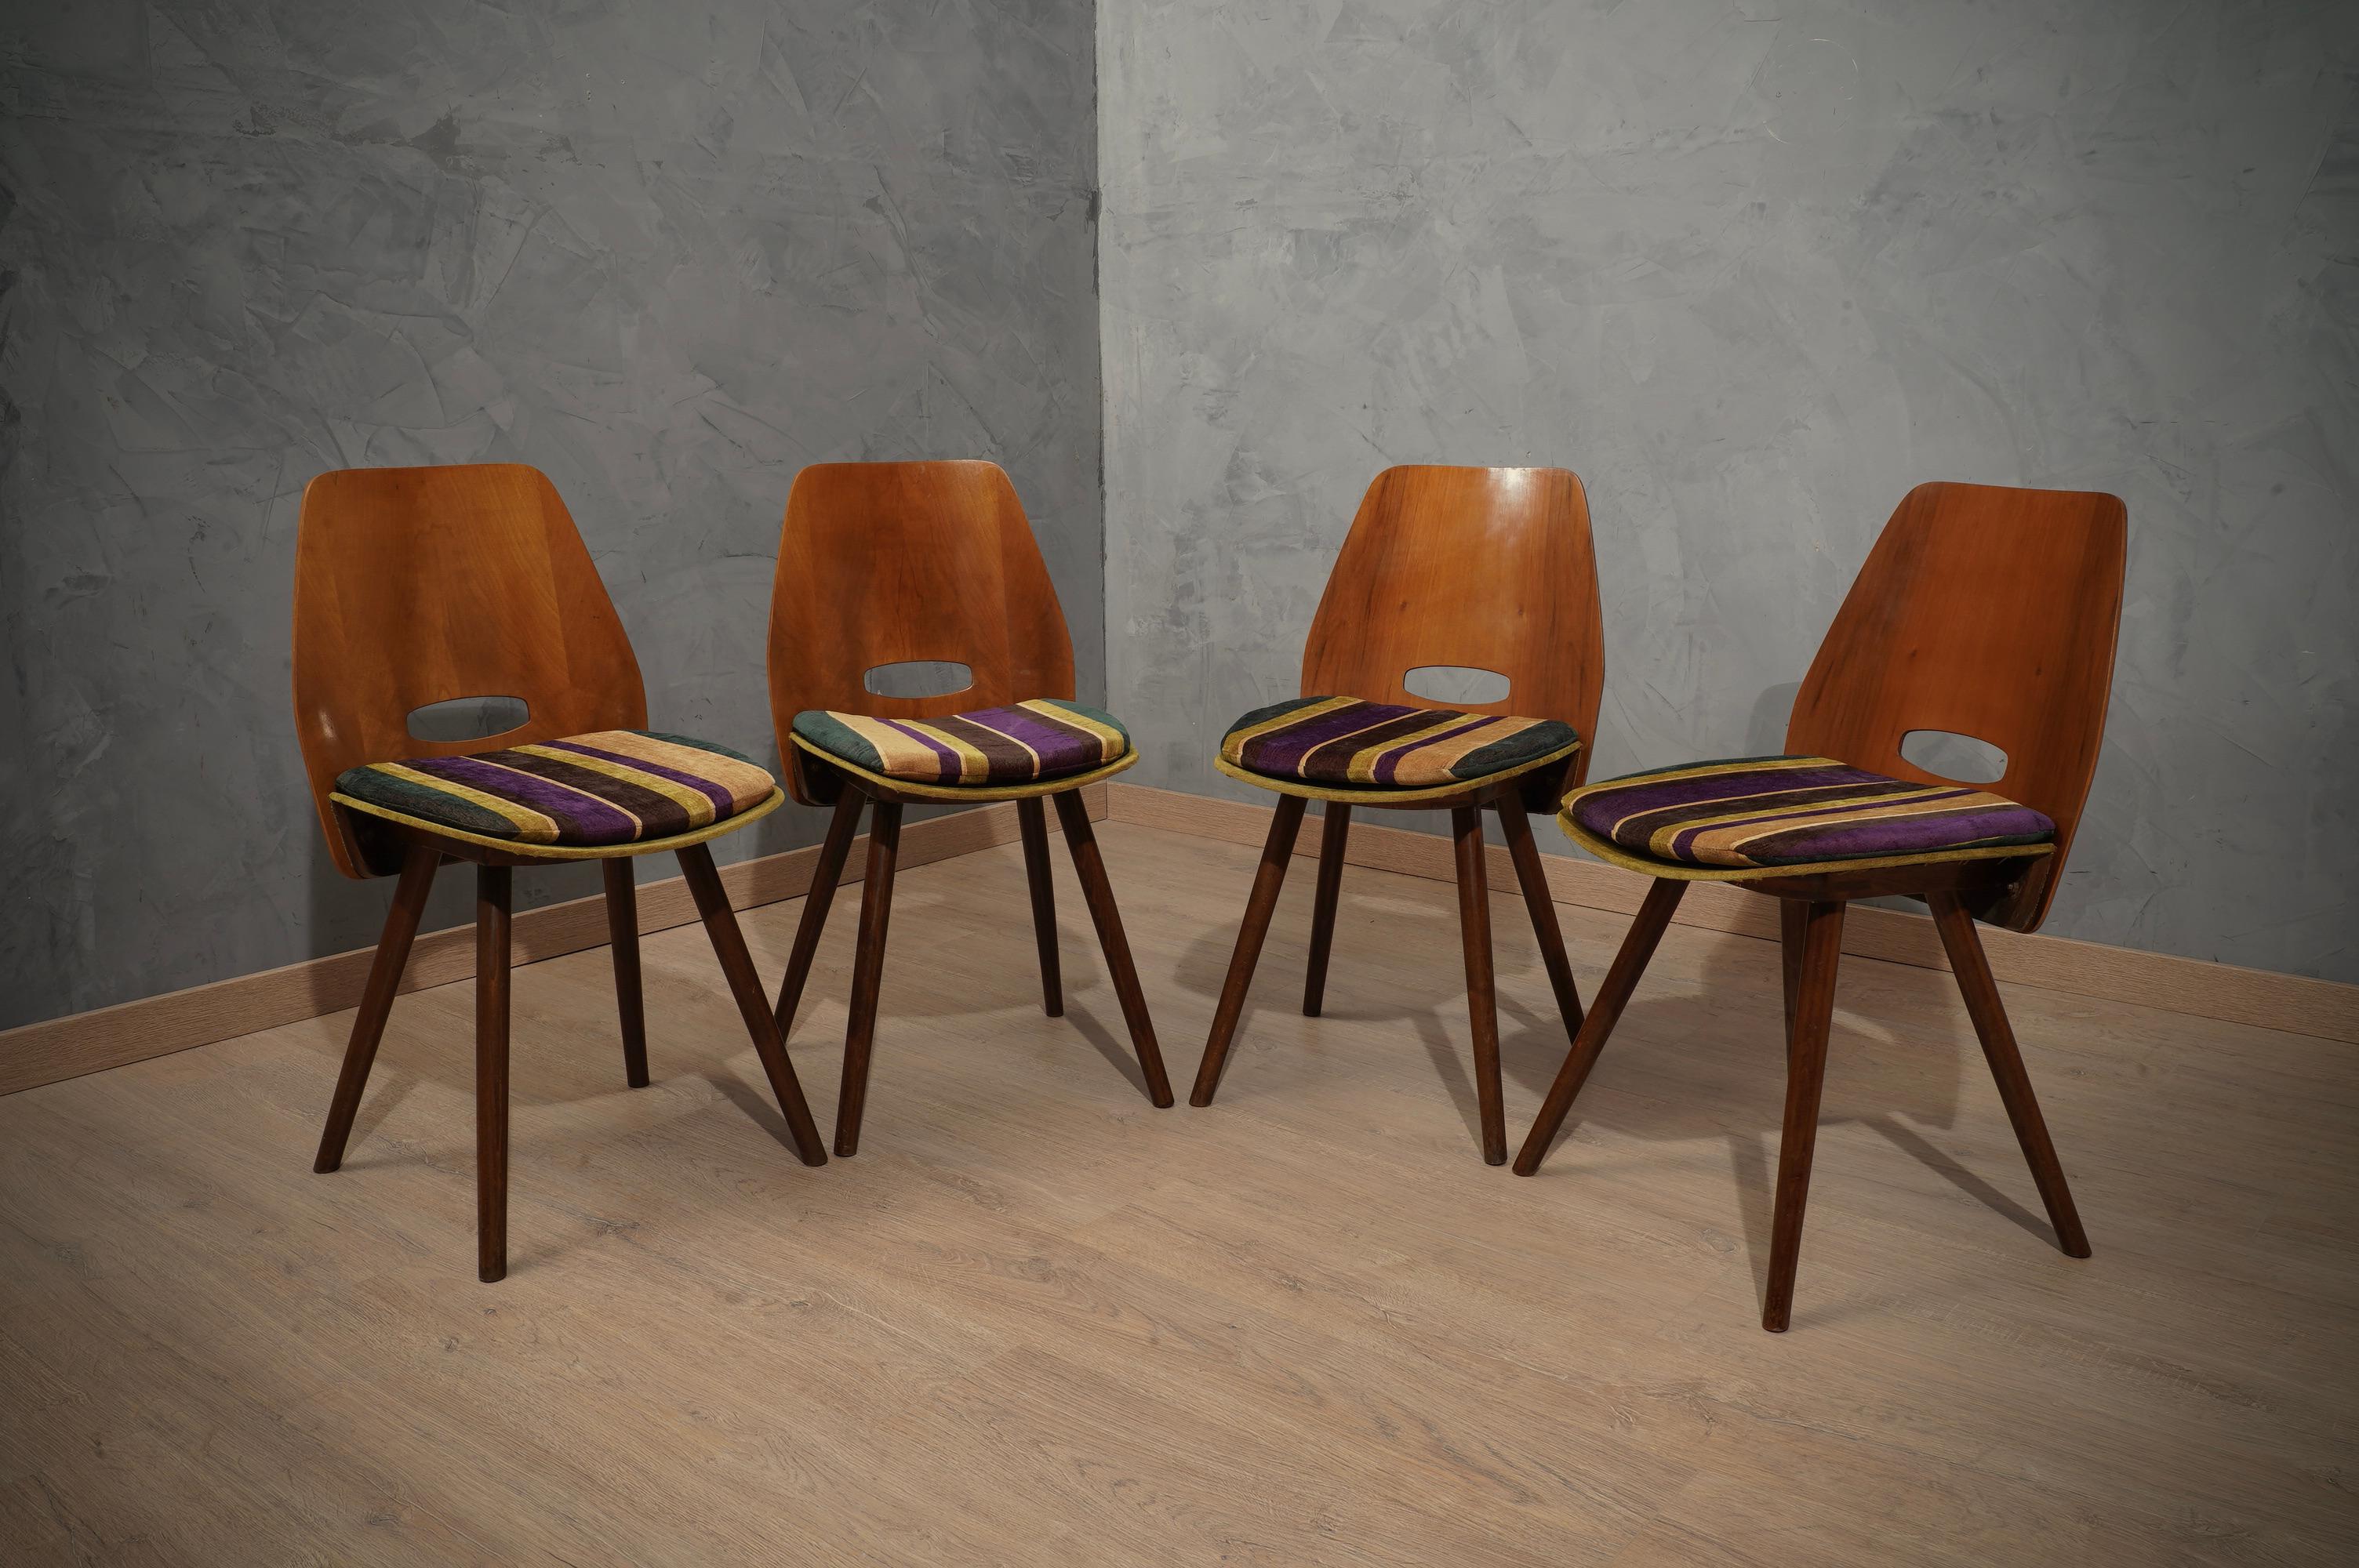 Simple materials but fantastic and unique design for these 4 chairs by Vittorio Nobili. Truly magnificent in shape.

Backrest made of steam-folded plywood and walnut veneer. Sitting in the same way folded but covered with a green velvet fabric.